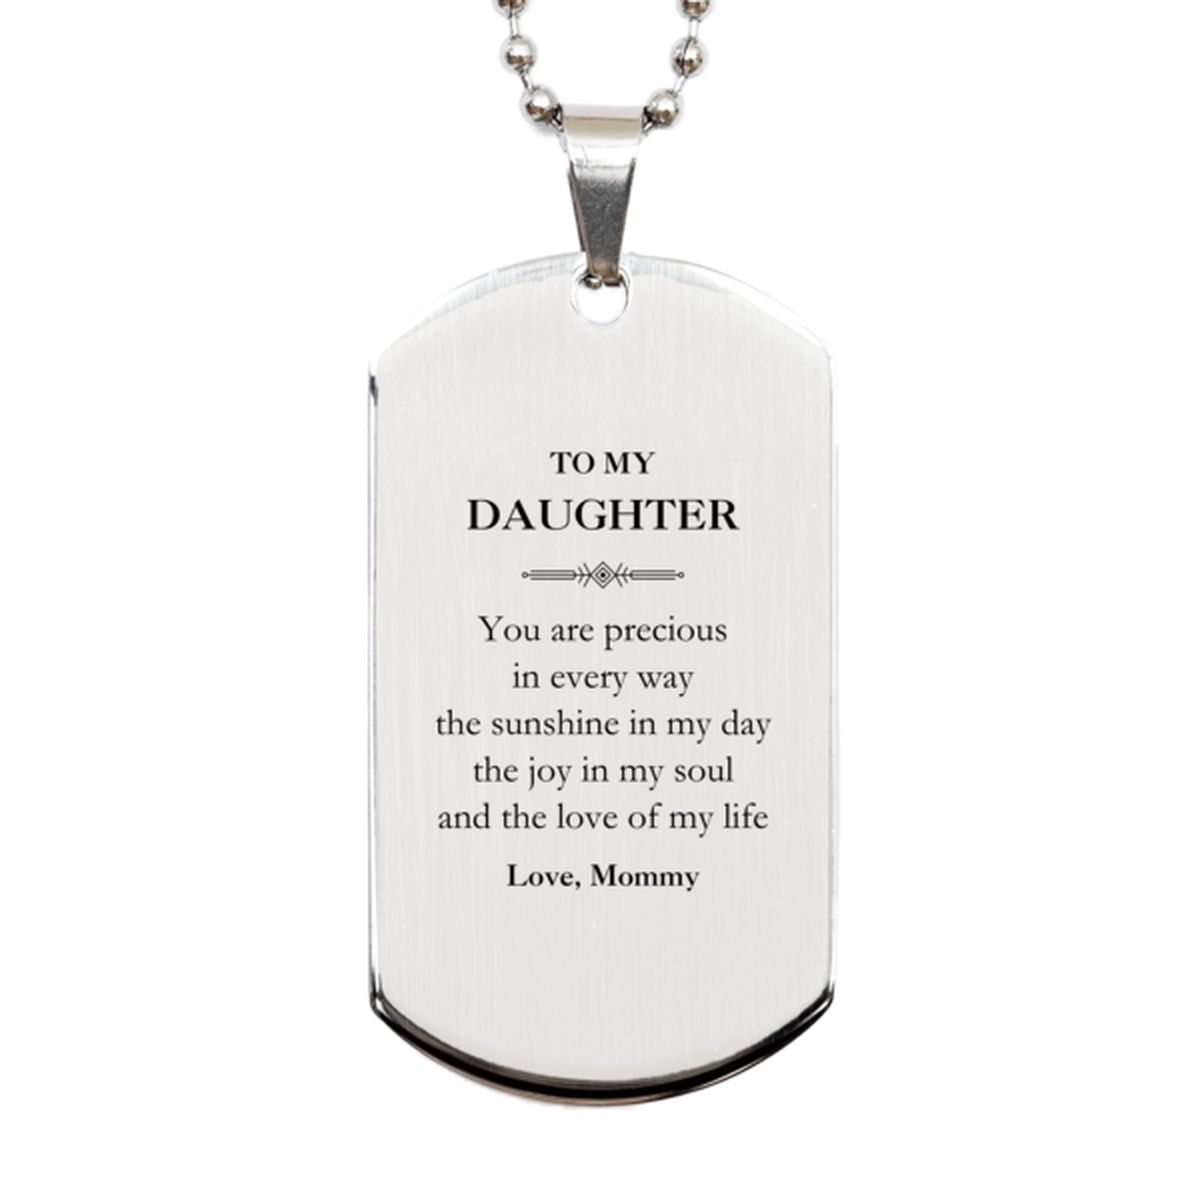 Graduation Gifts for Daughter Silver Dog Tag Present from Mommy, Christmas Daughter Birthday Gifts Daughter You are precious in every way the sunshine in my day. Love, Mommy